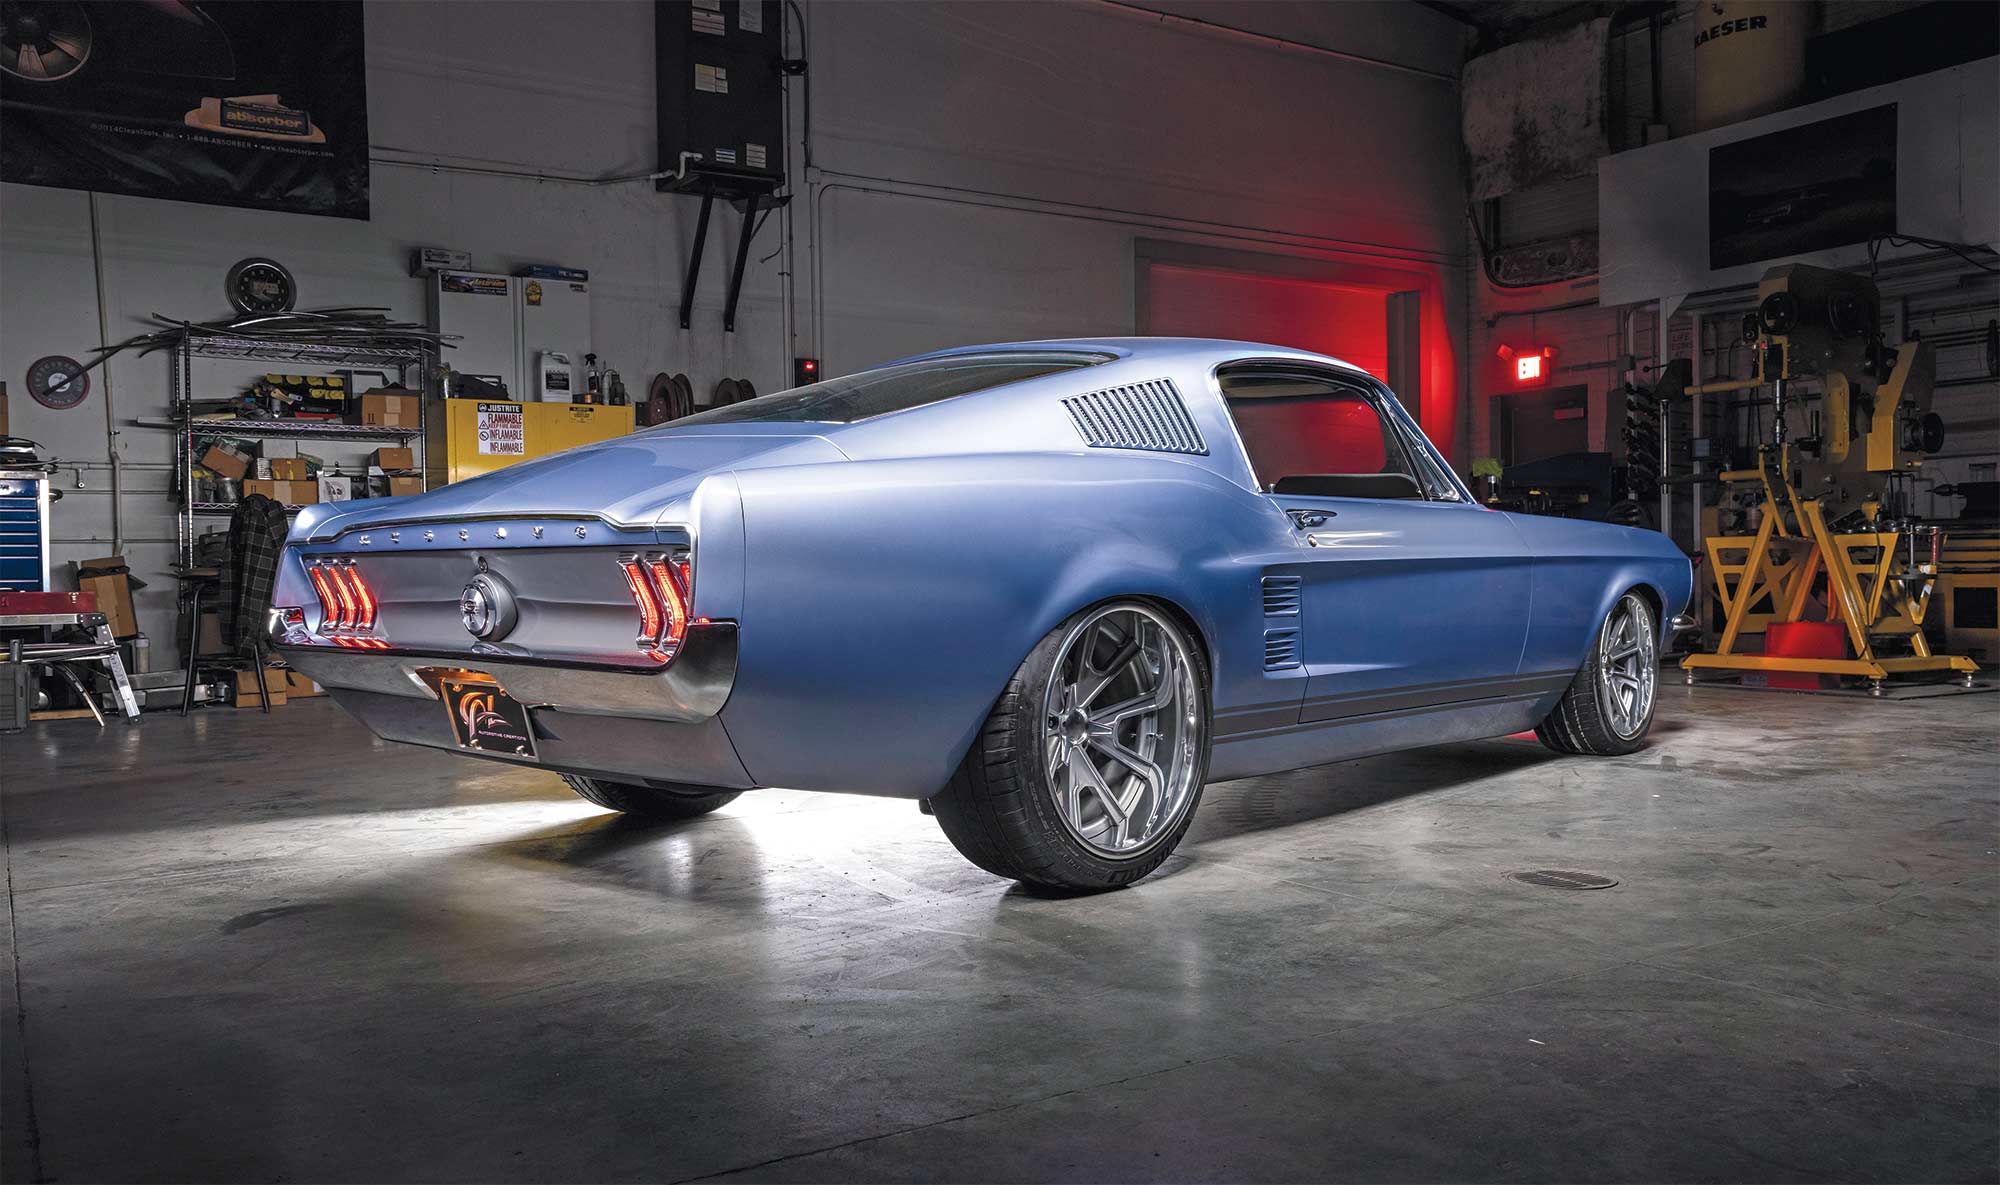 view of 1968 Mustang bumper and back tire